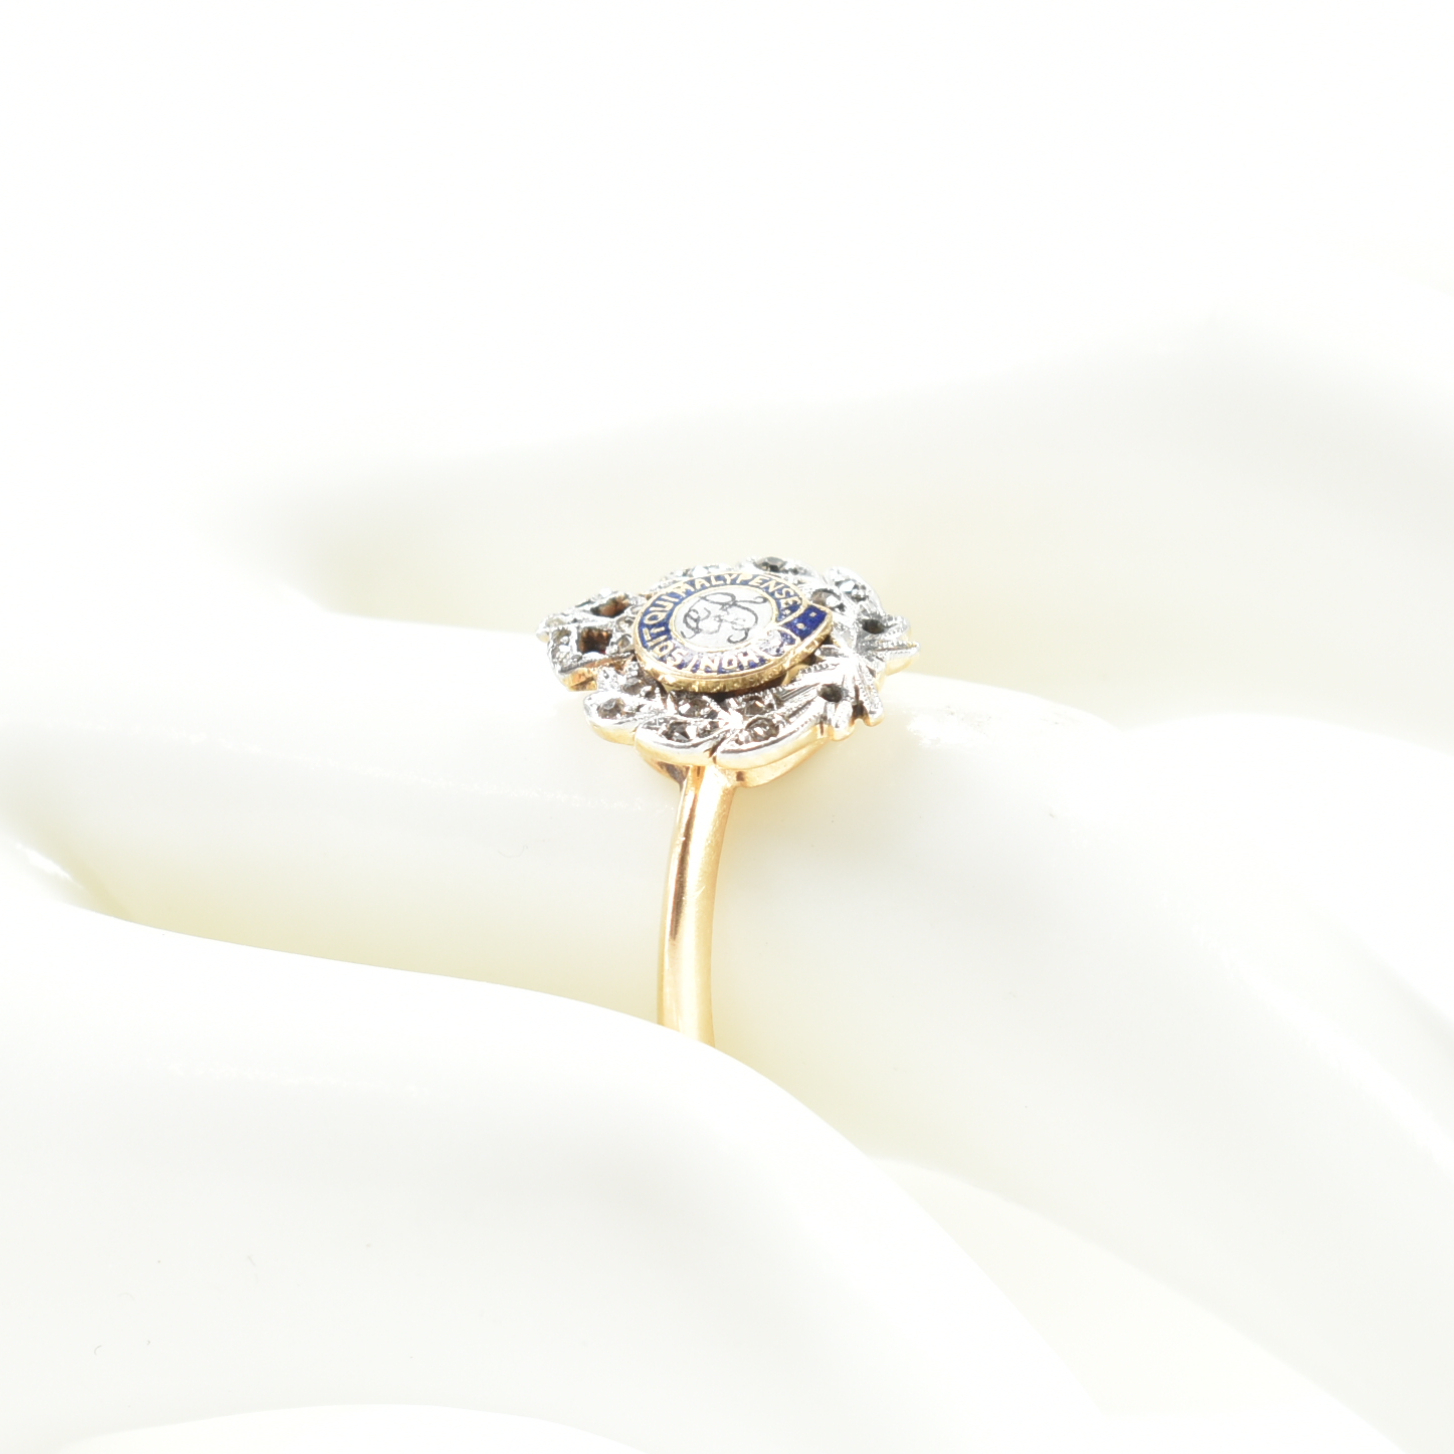 GEORGE VI GOLD & DIAMOND MILITARY SWEETHEART RING - Image 7 of 7